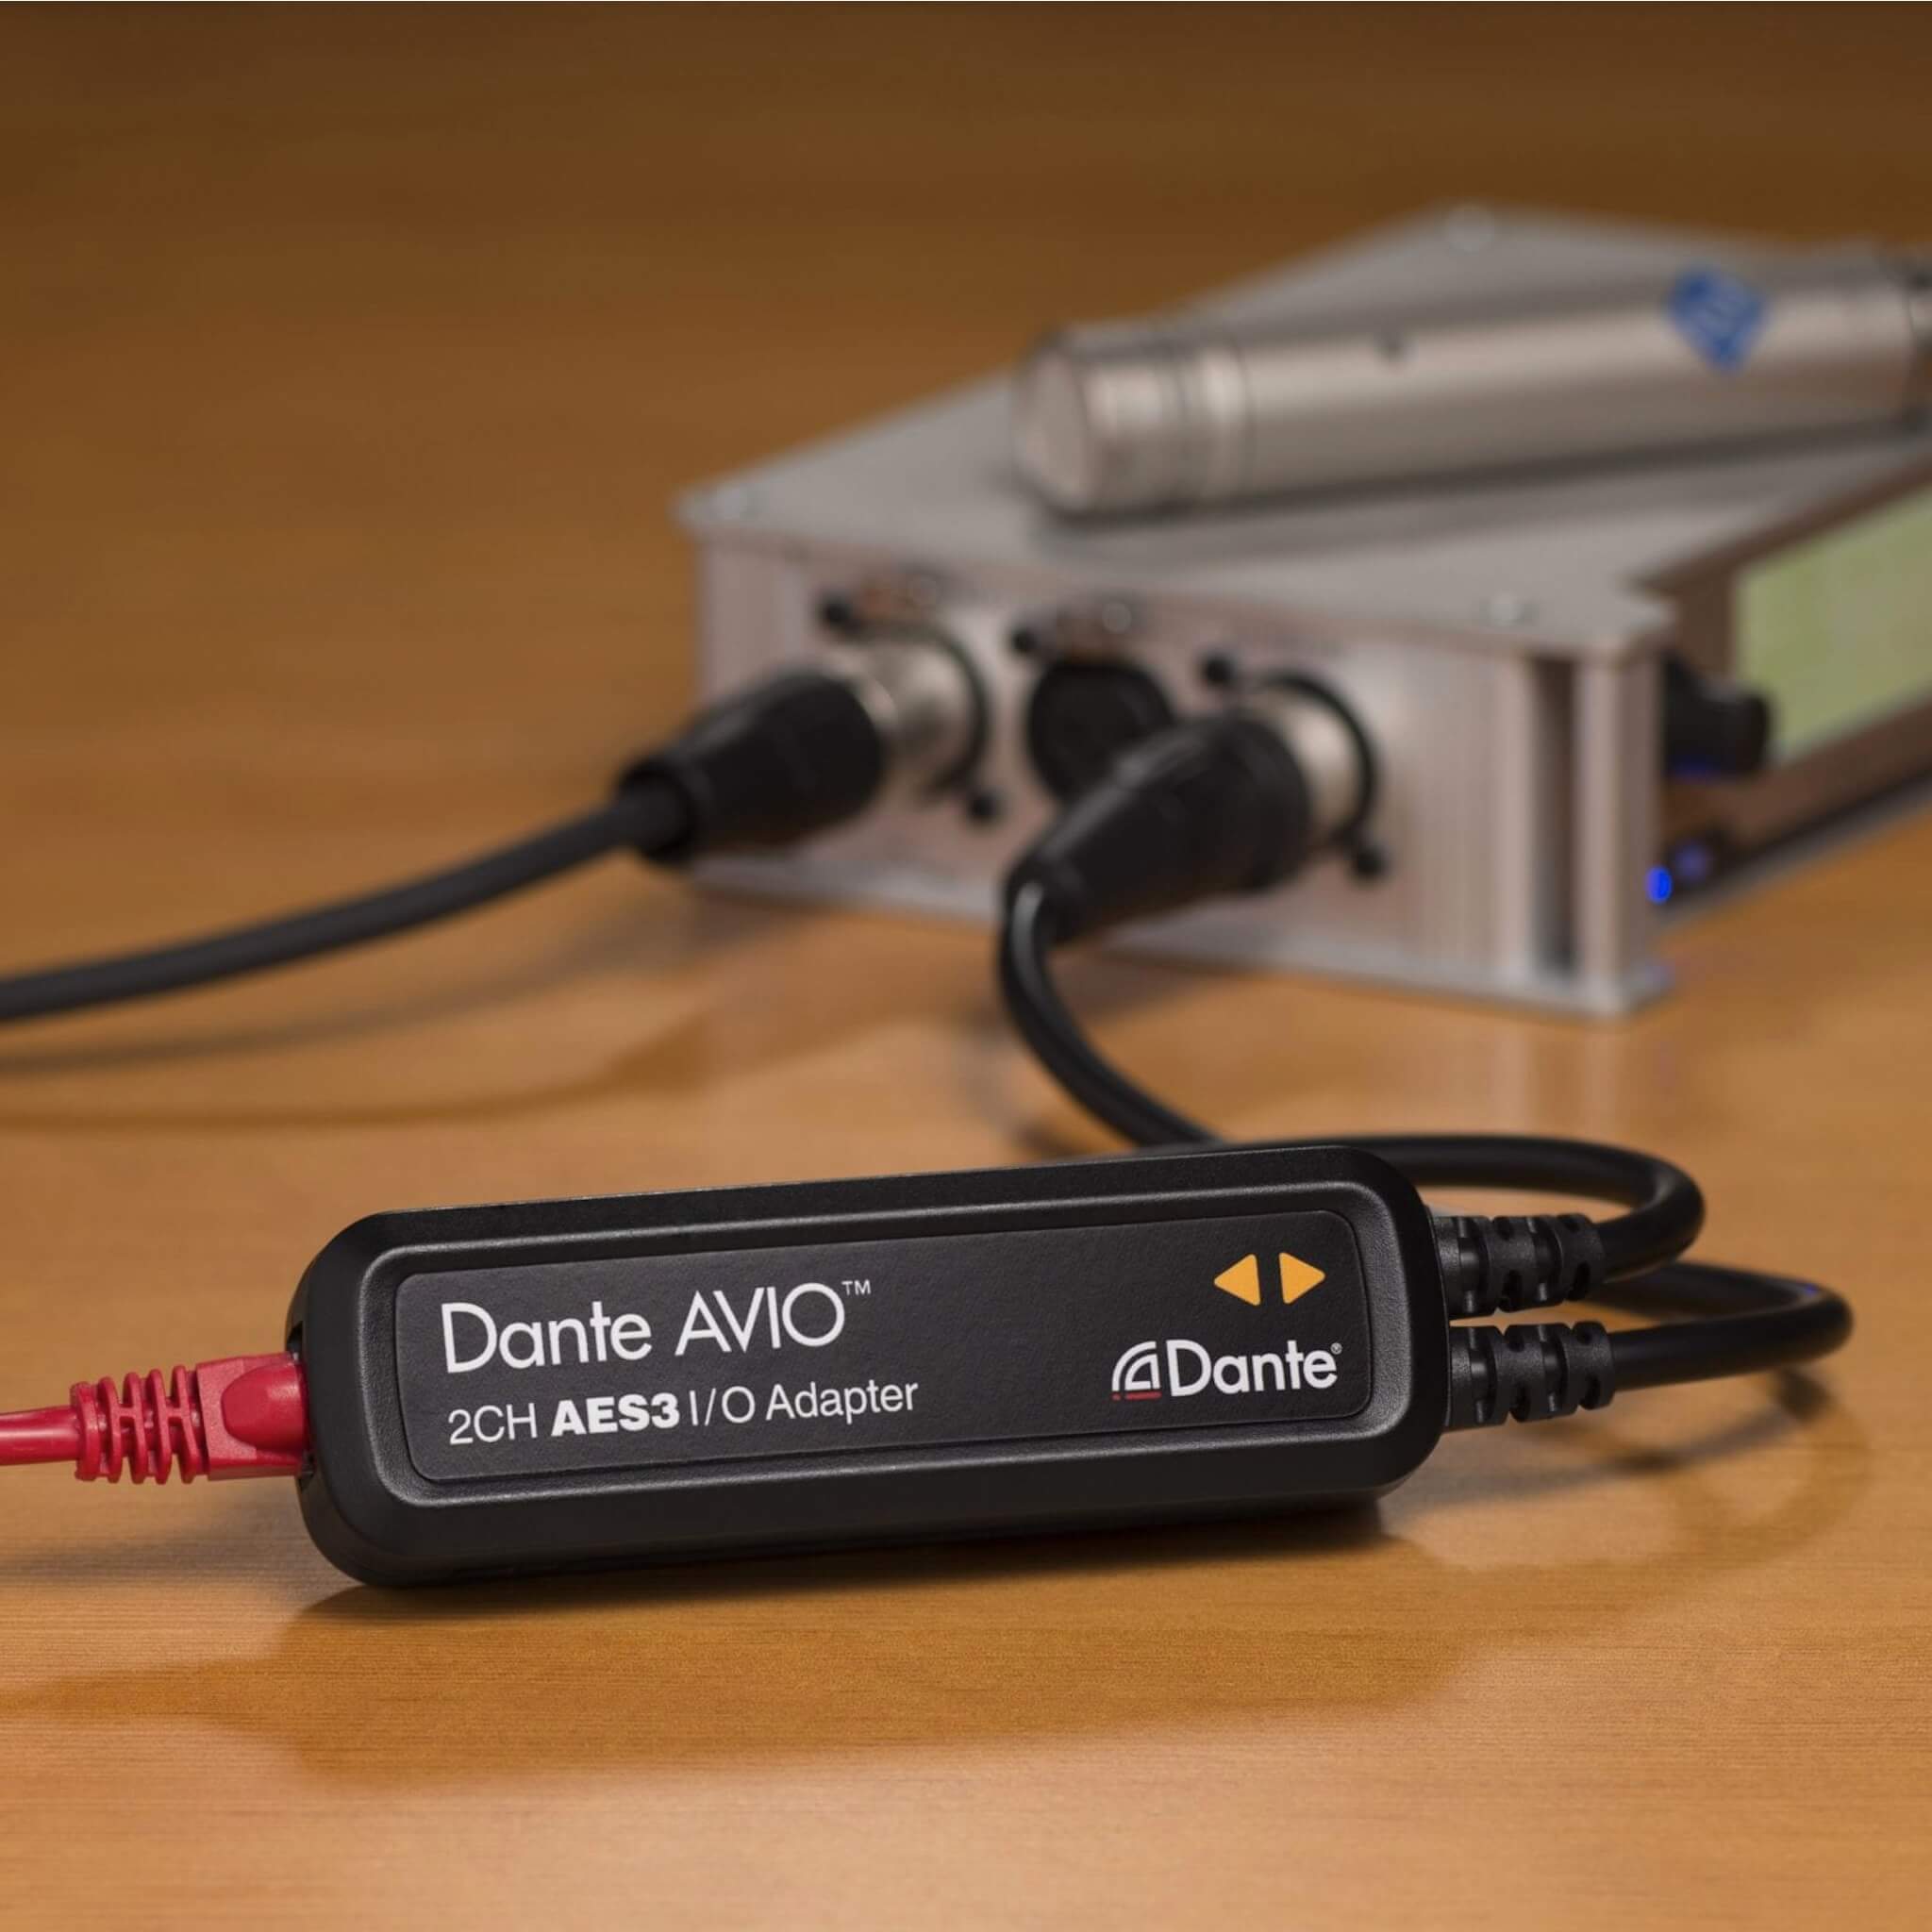 Audinate Dante AVIO 2-Channel AES3 I/O Adapter, connected